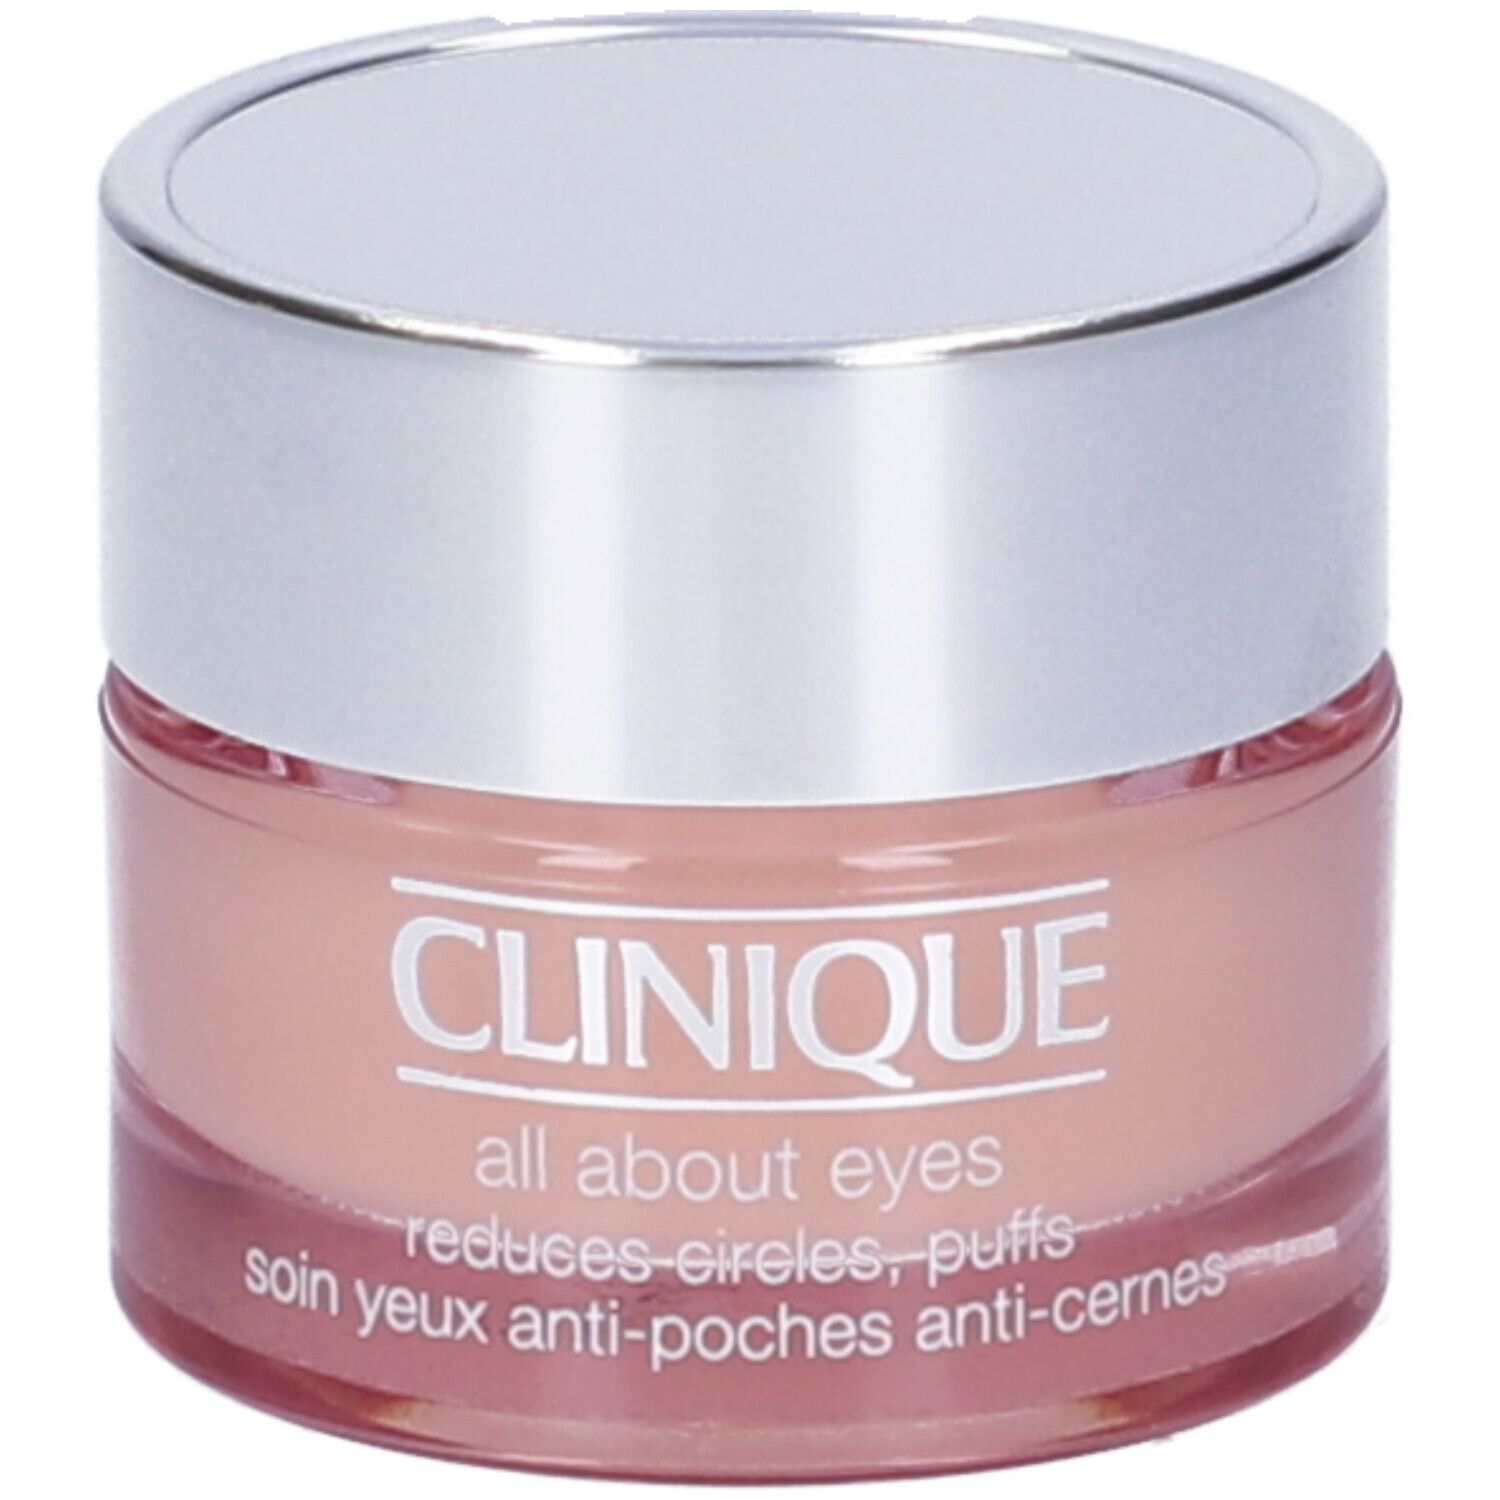 Image of Clinique All About Eyes Crema Contorno Occhi